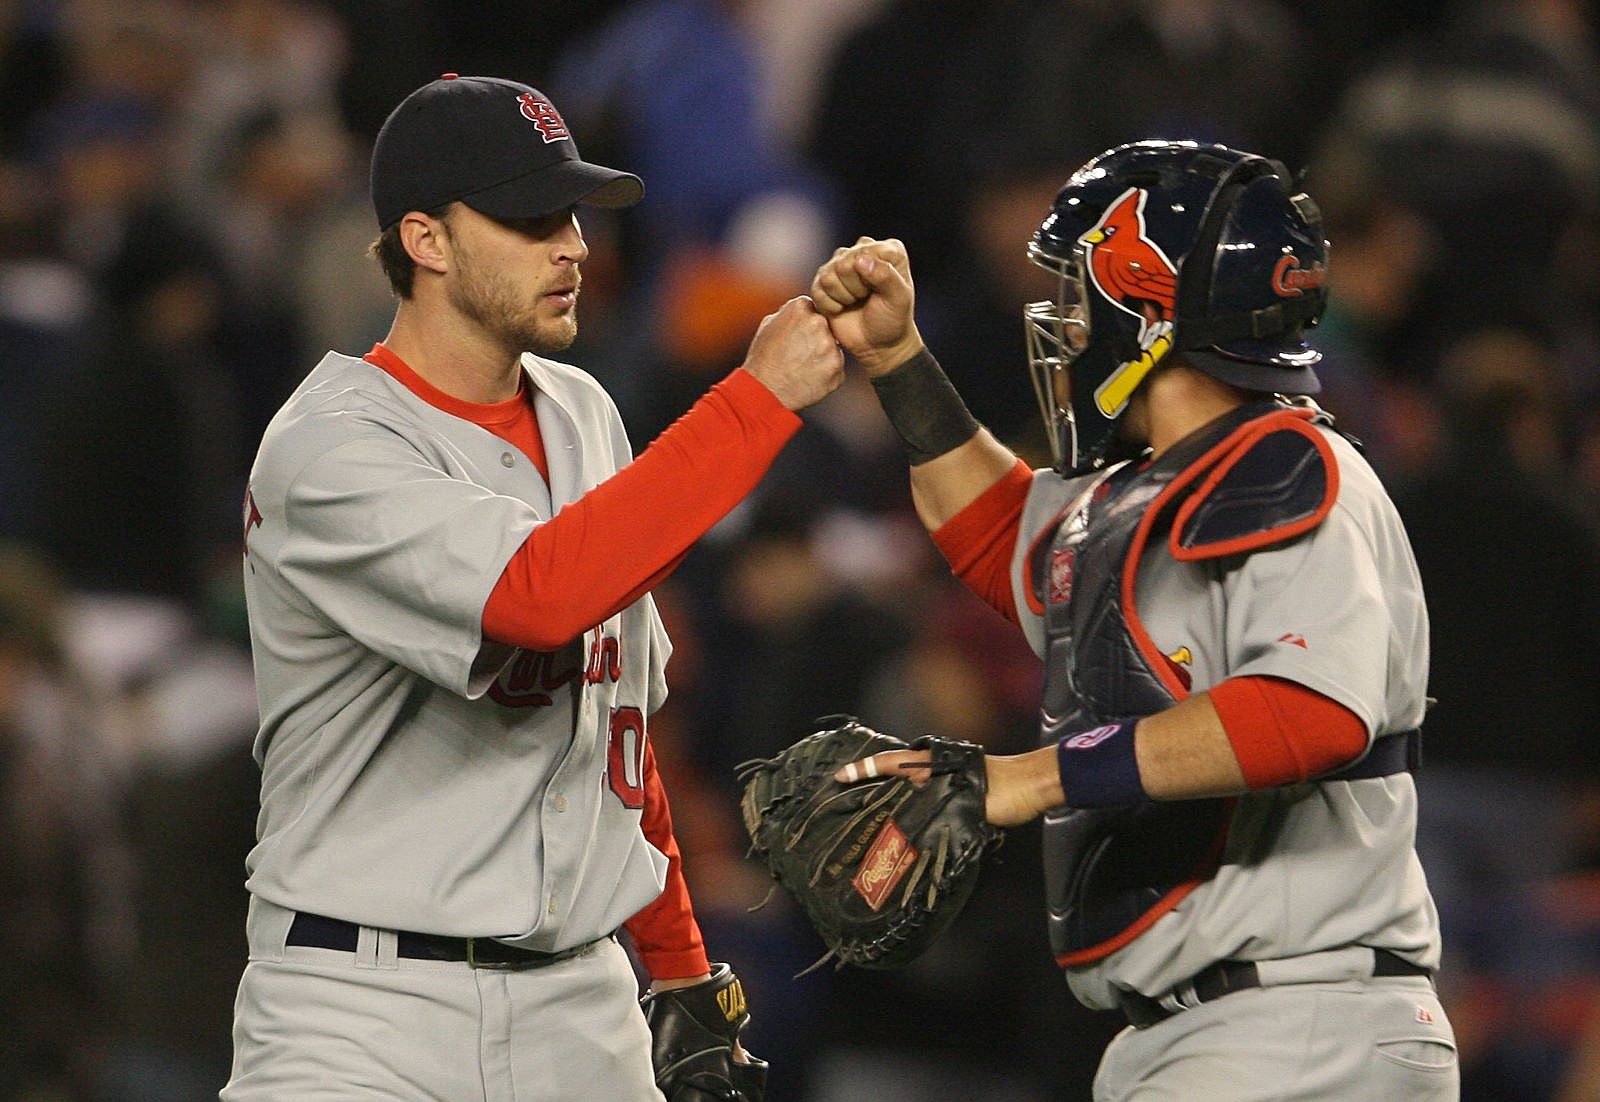 Waino and Yadi: Two storybook careers in one jersey